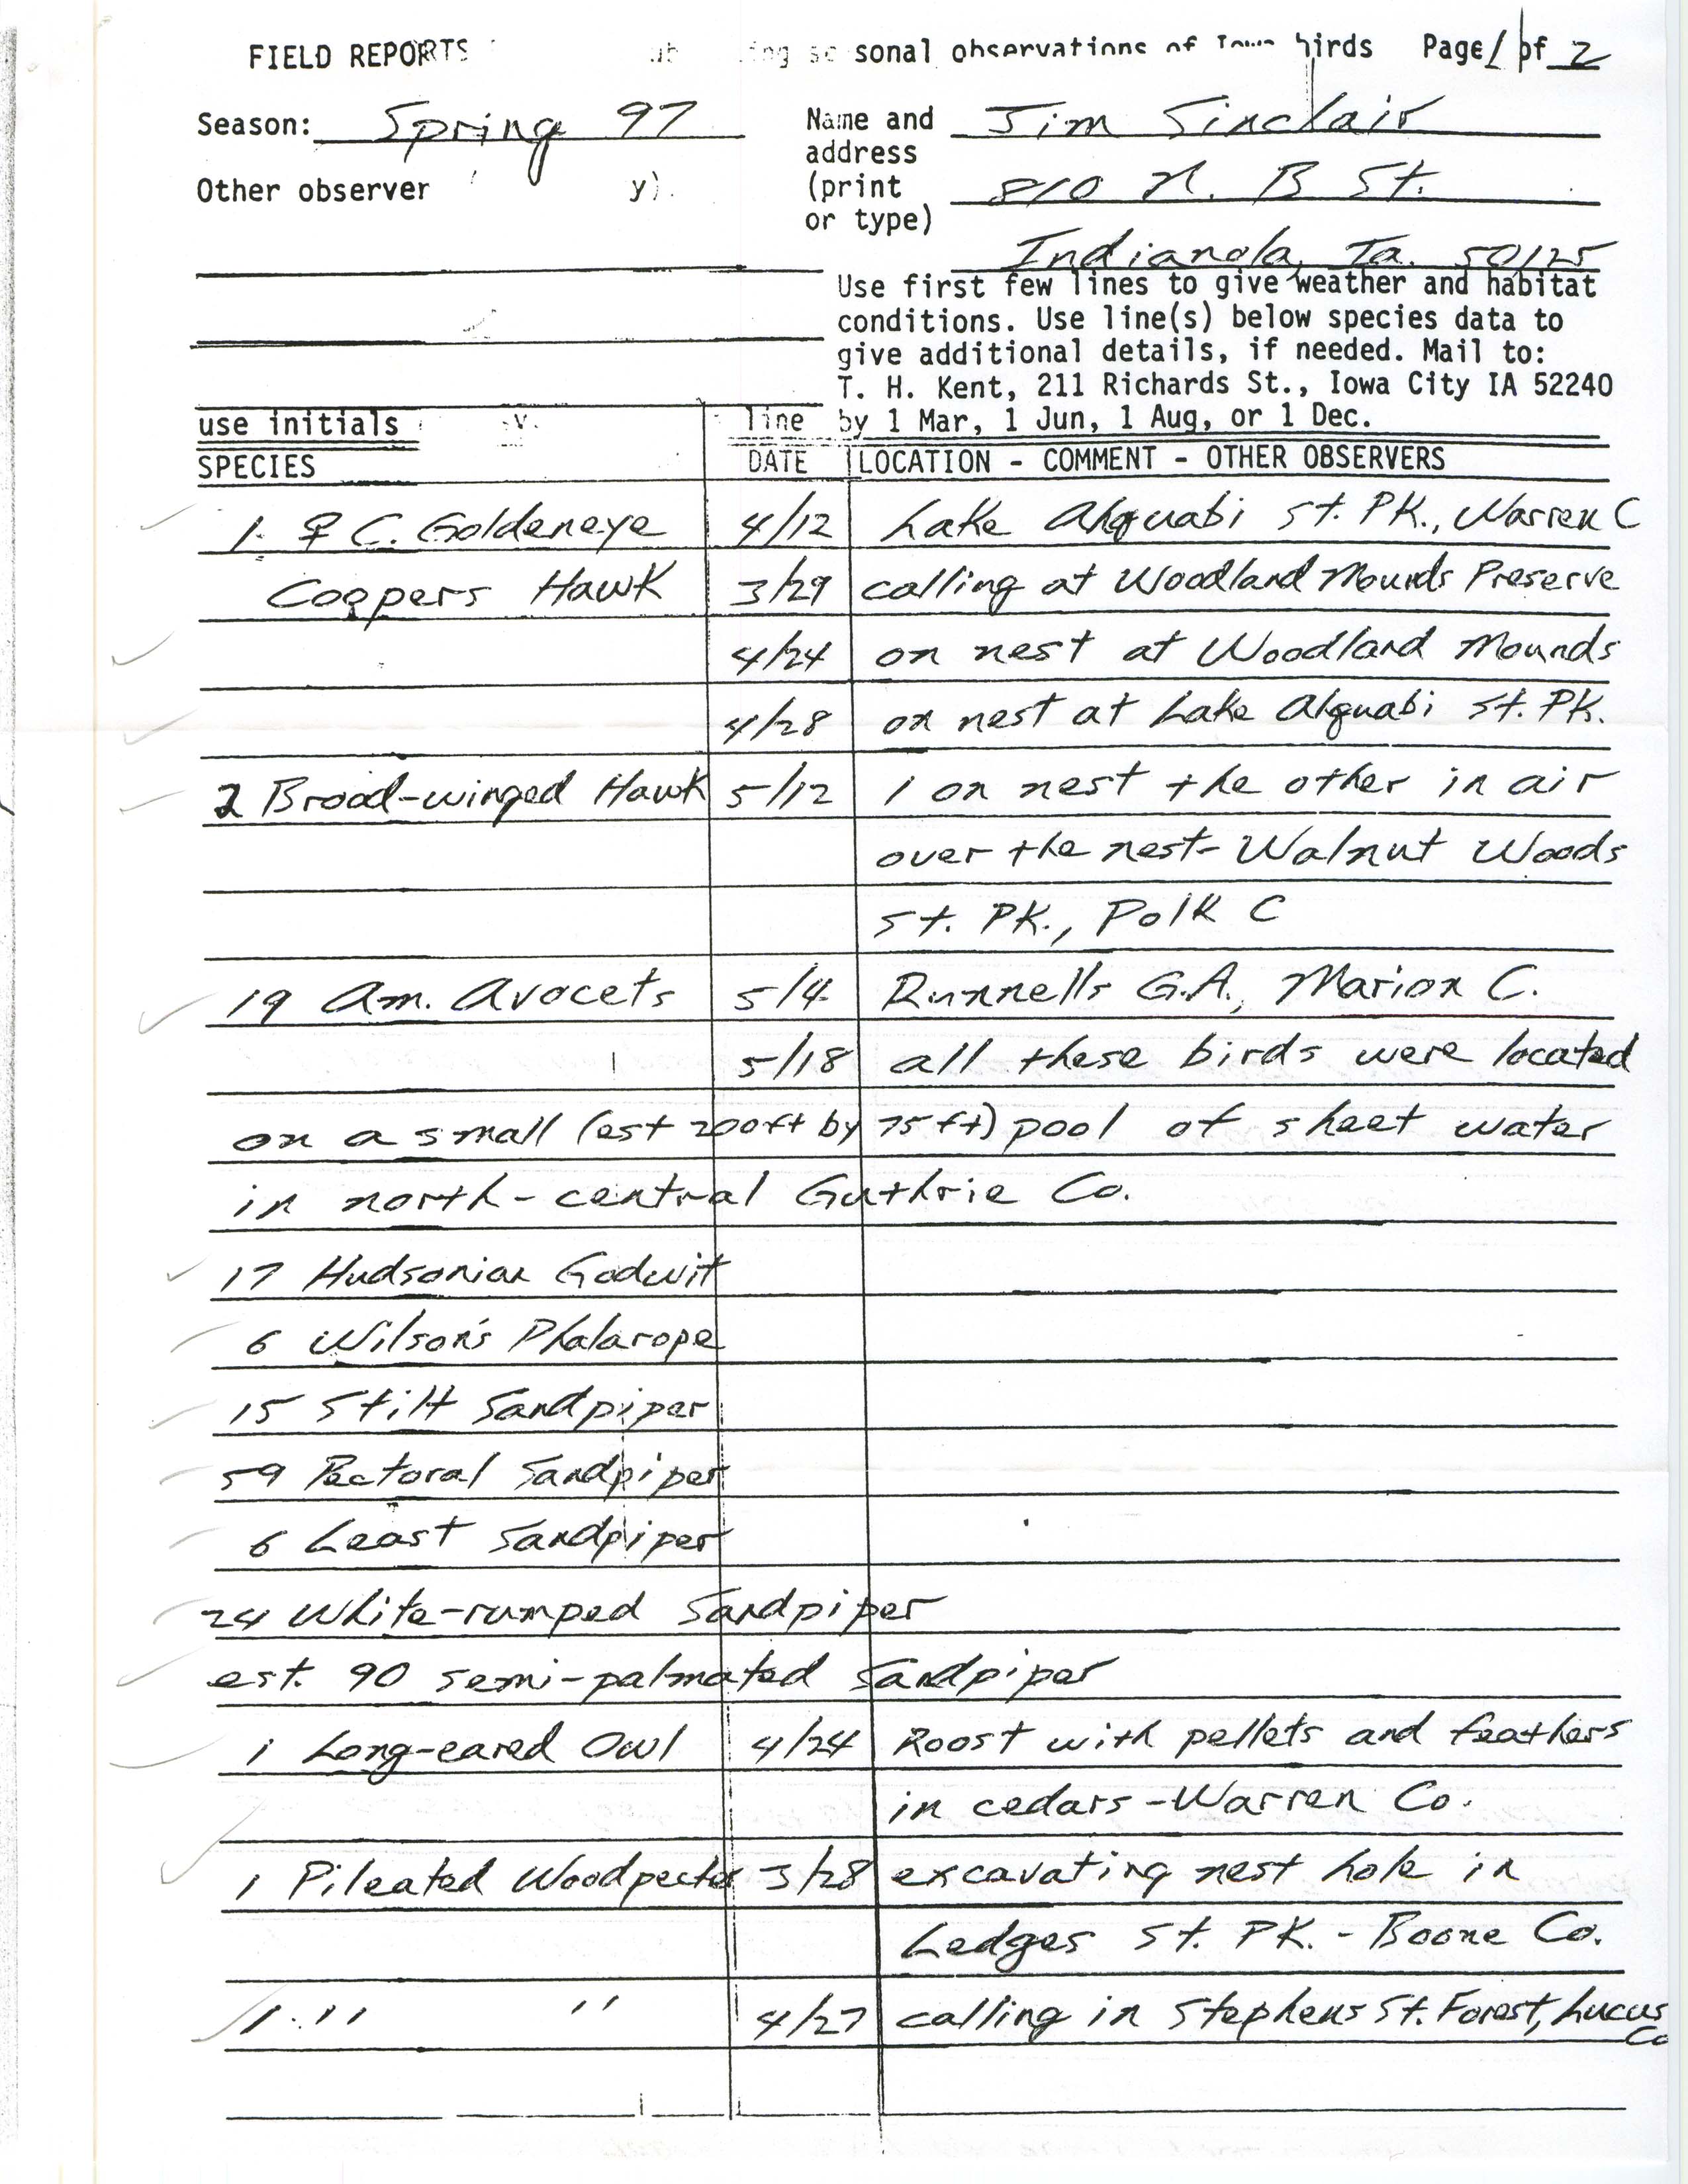 Field reports form for submitting seasonal observations of Iowa birds, Jim Sinclair, spring 1997